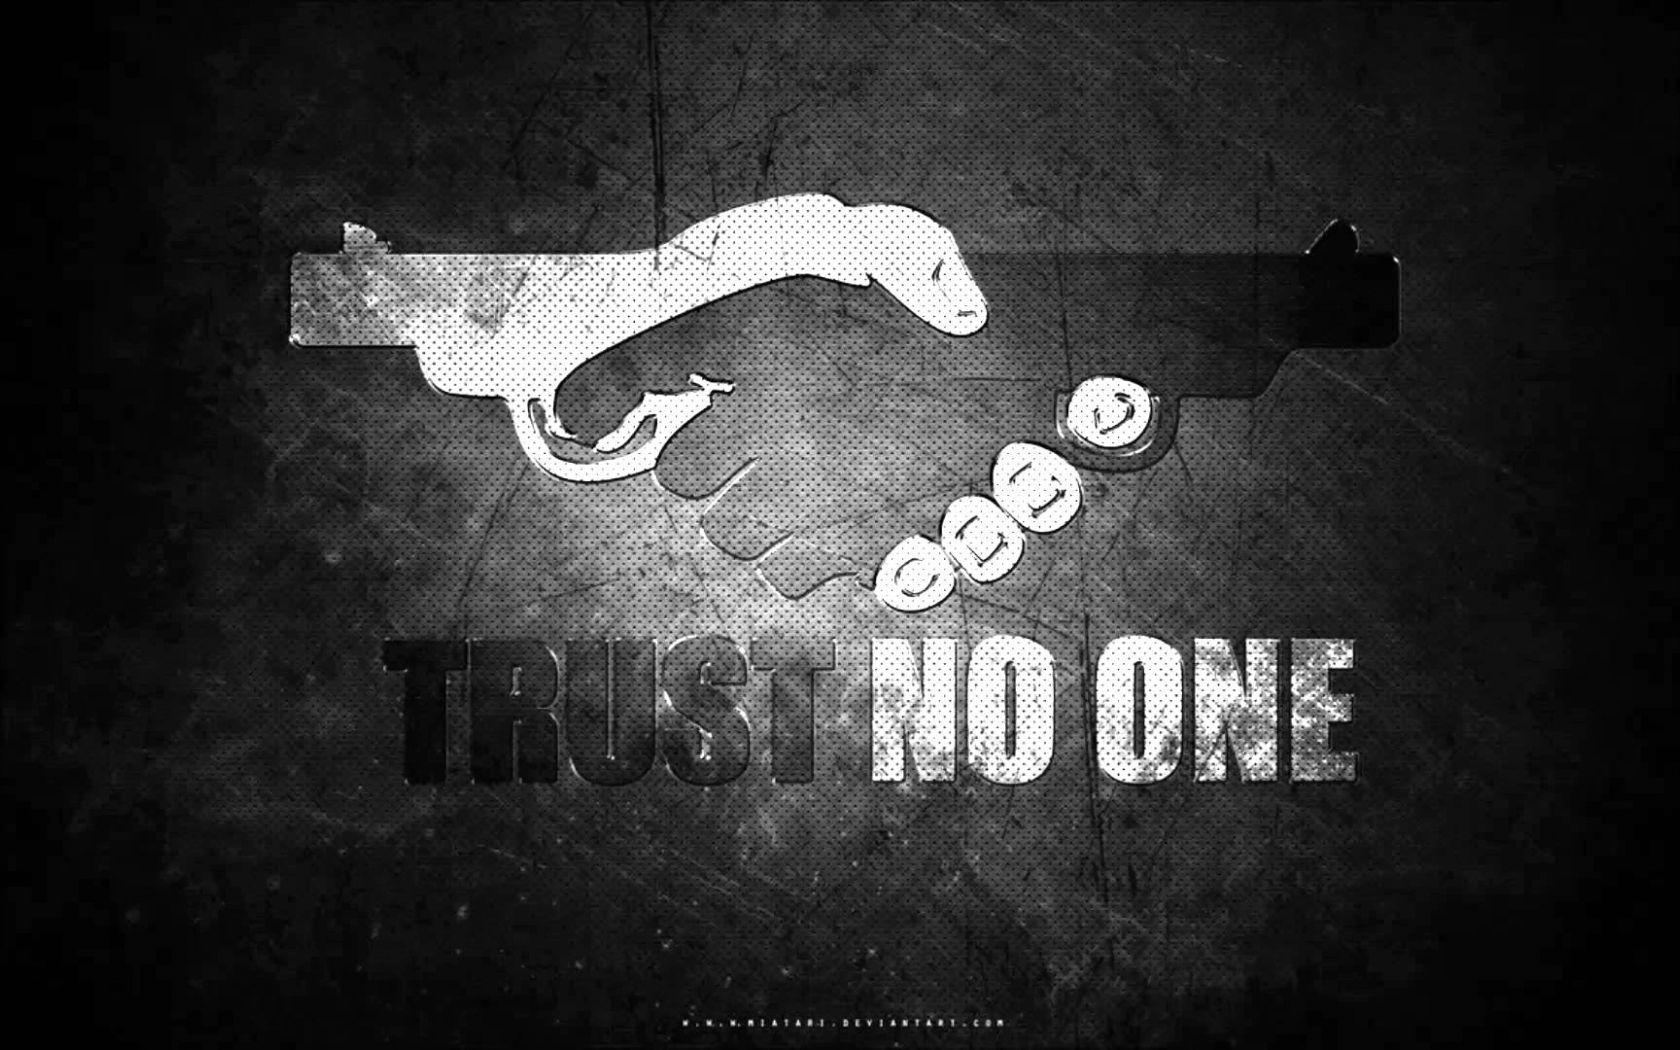 Trust No One Wallpapers - Top Free Trust No One Backgrounds ...